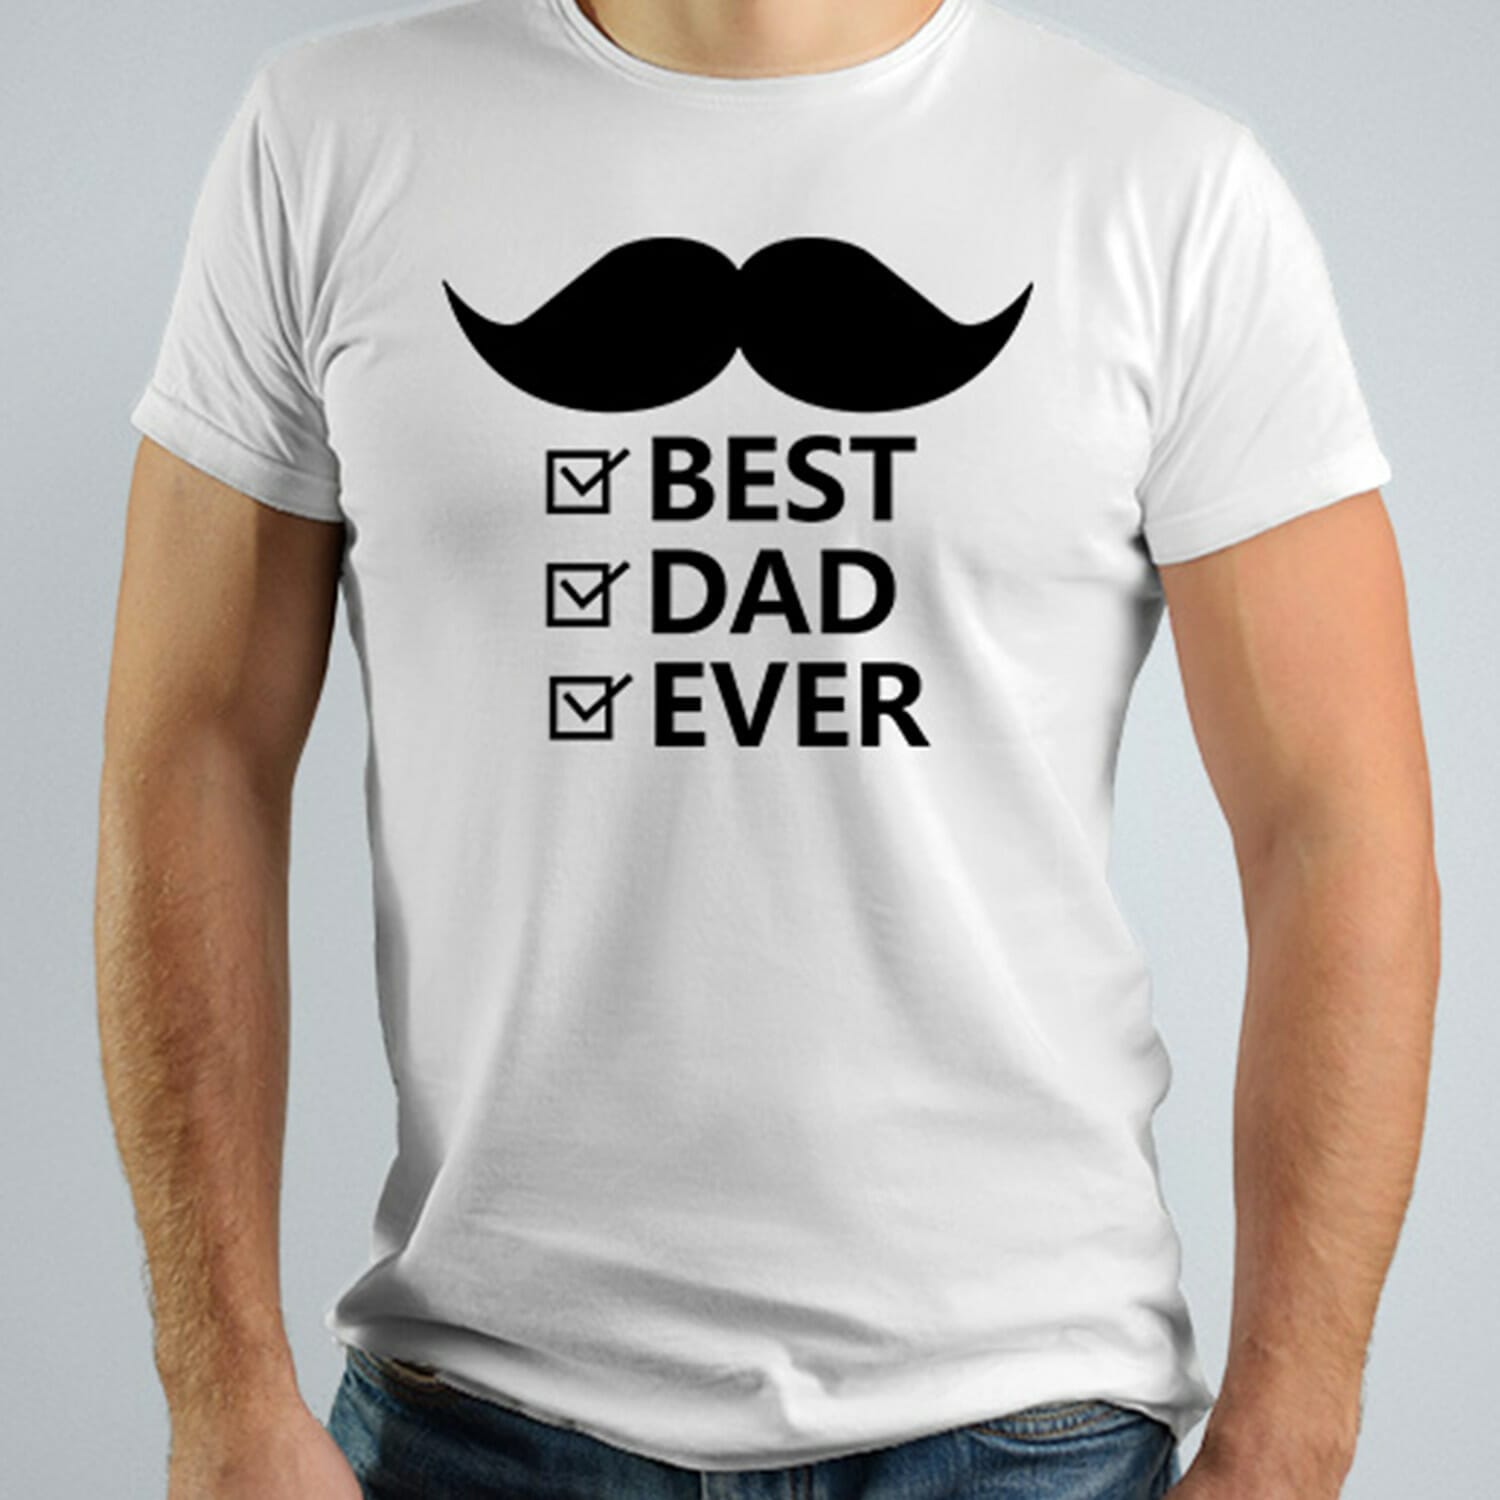 Best dad ever With A Moustache Tshirt design